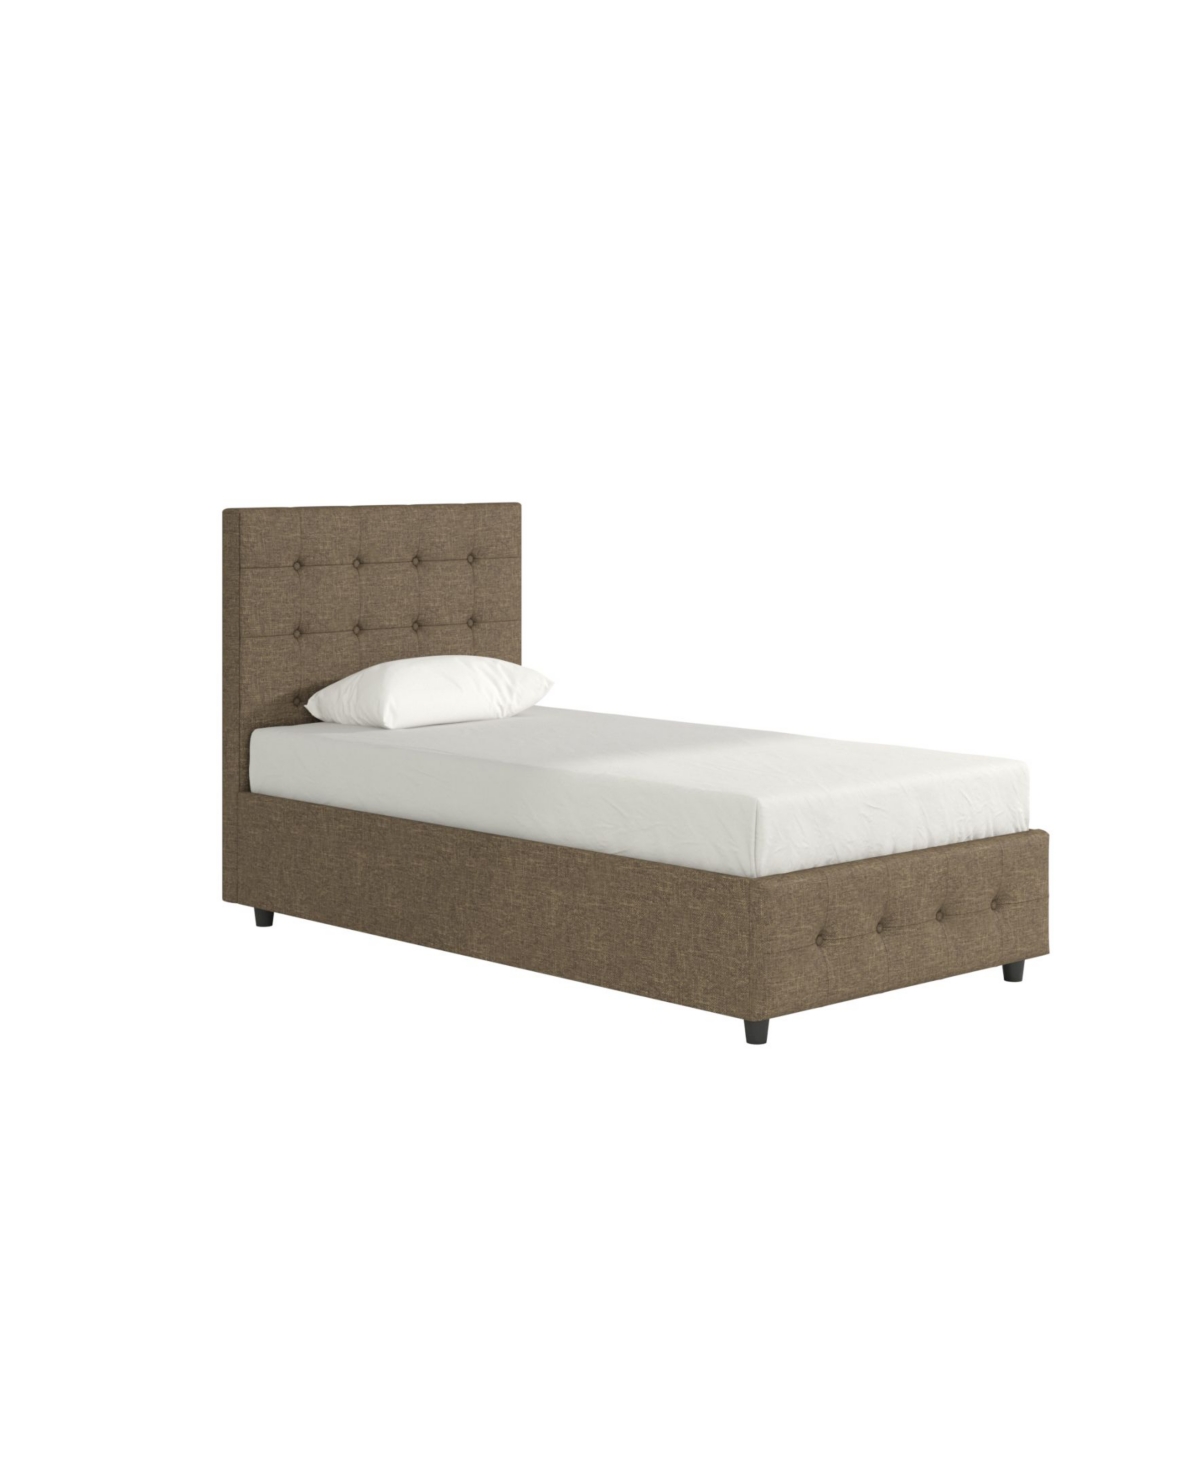 11070367 Atwater Living Sydney Upholstered Bed, Twin sku 11070367